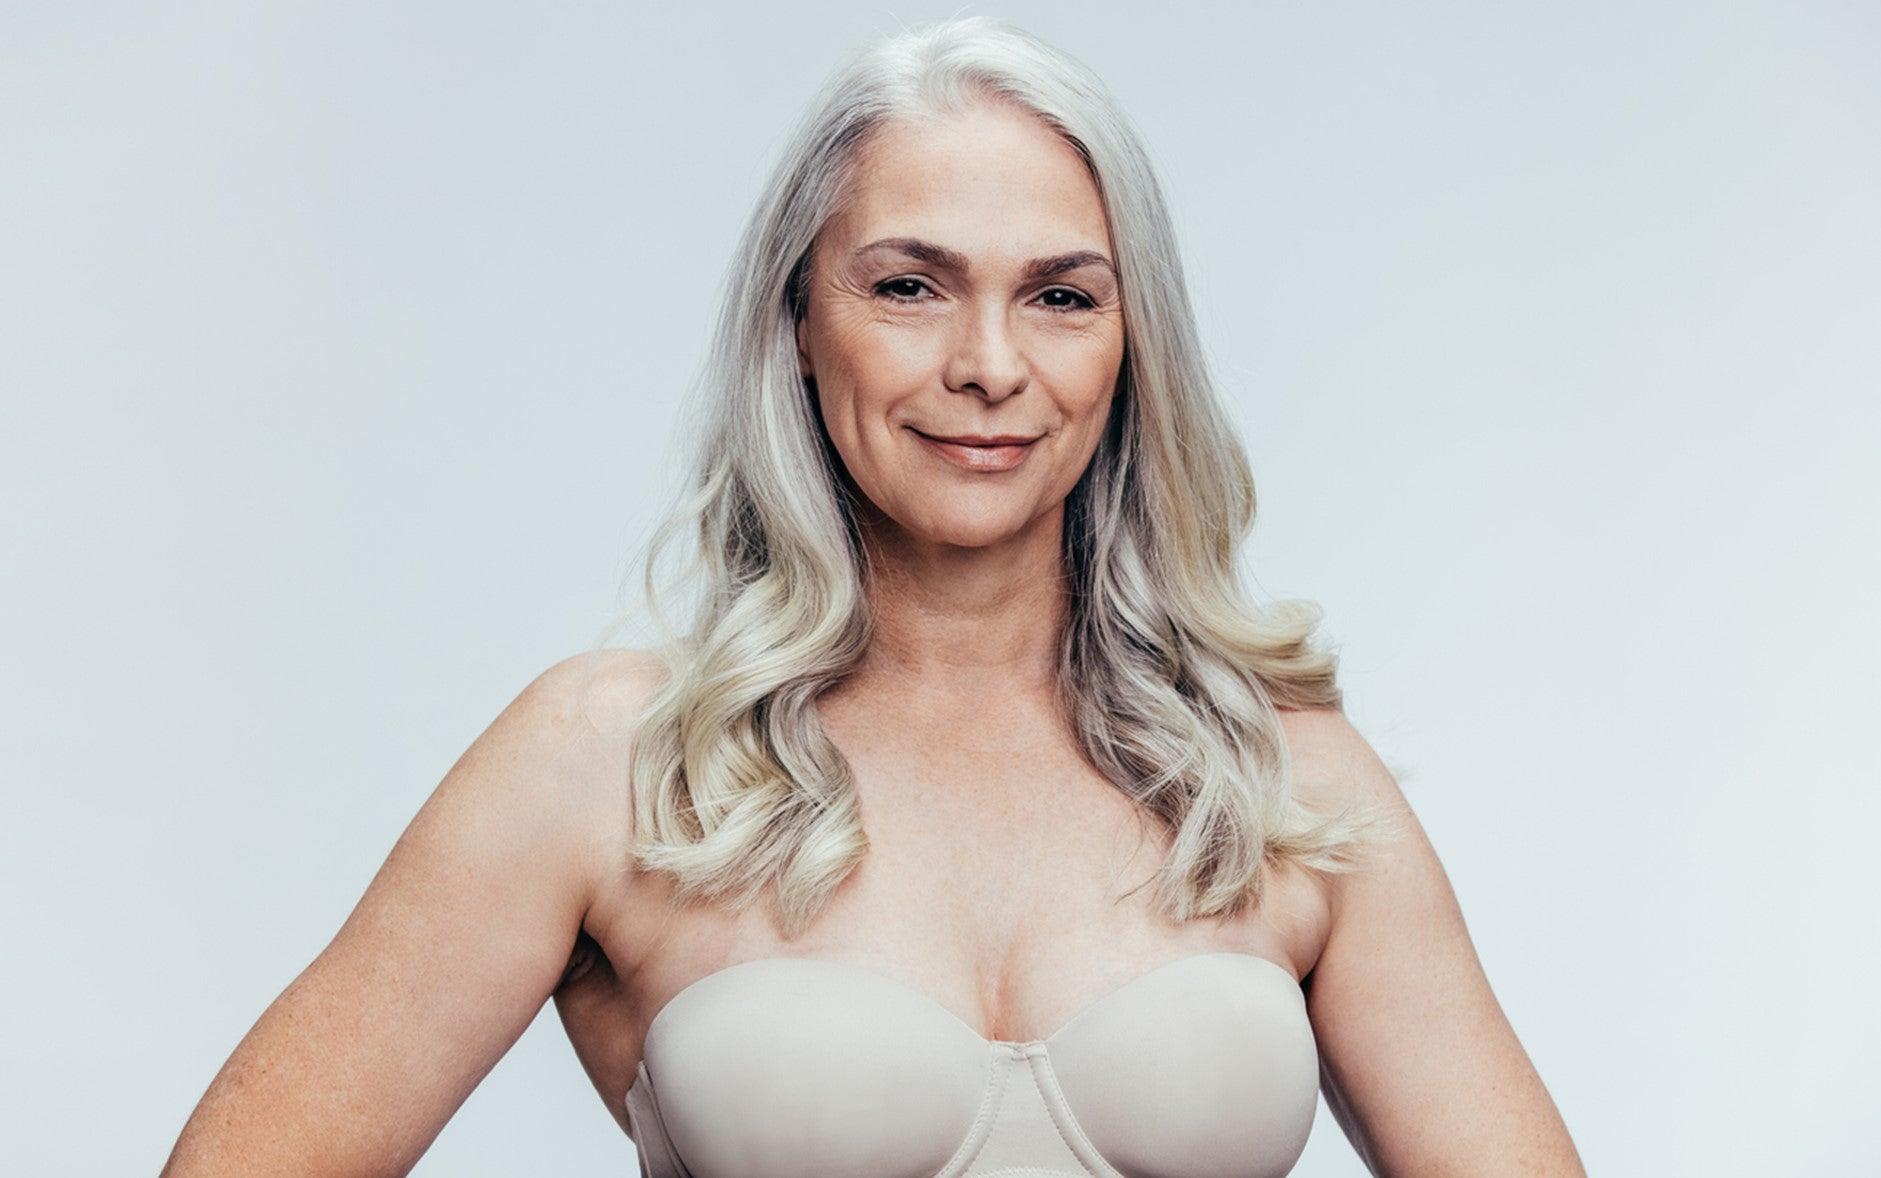 How To Choose A Bra For An Older Woman?